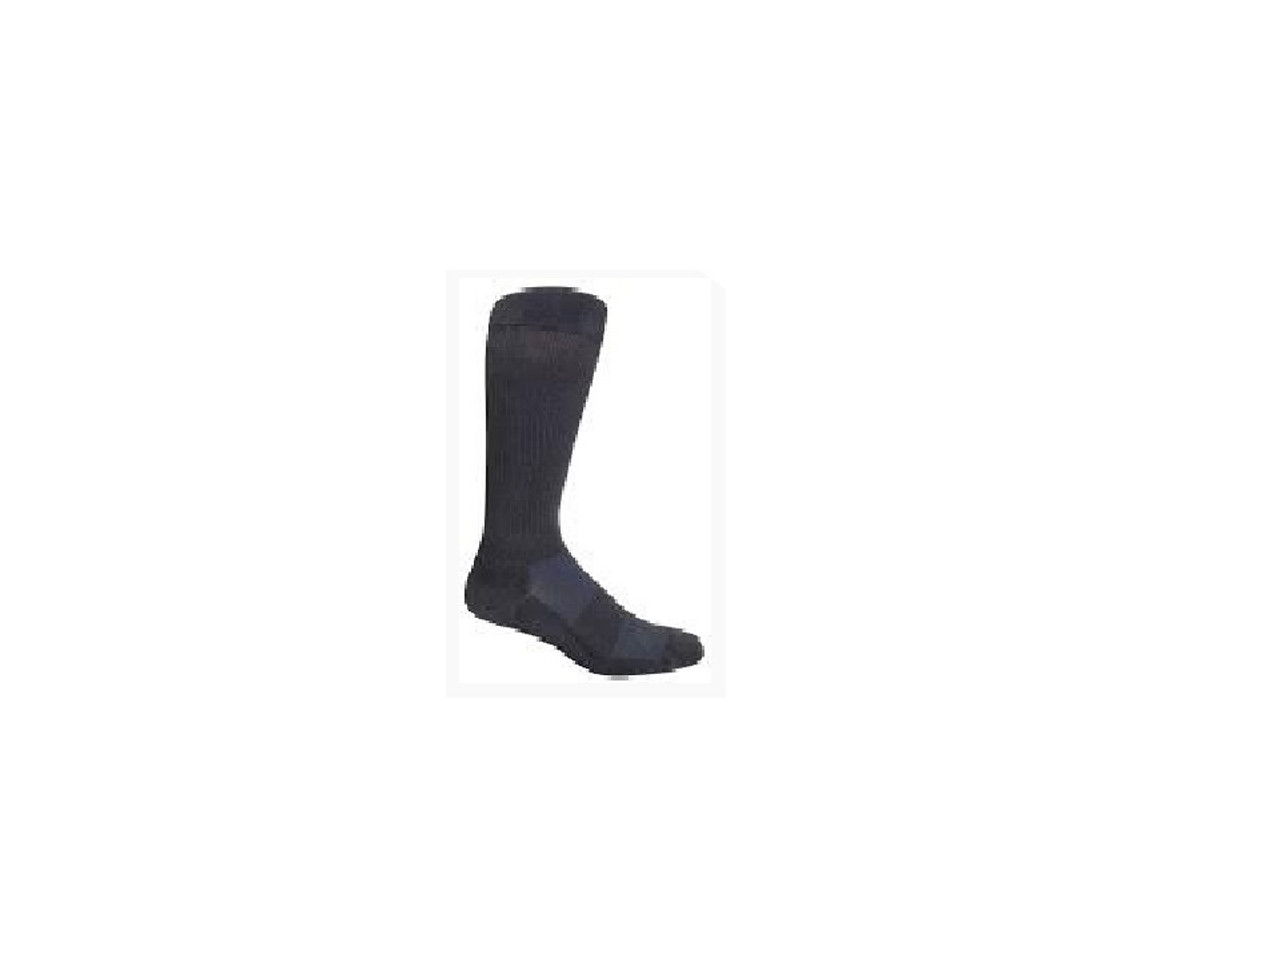 Dr. Segal's Compression Socks Women EVERYDAY COTTON - GREY - SIZE: A STRENGTH:15-20 MMHG (1 Pair) (HH E710CWA11)